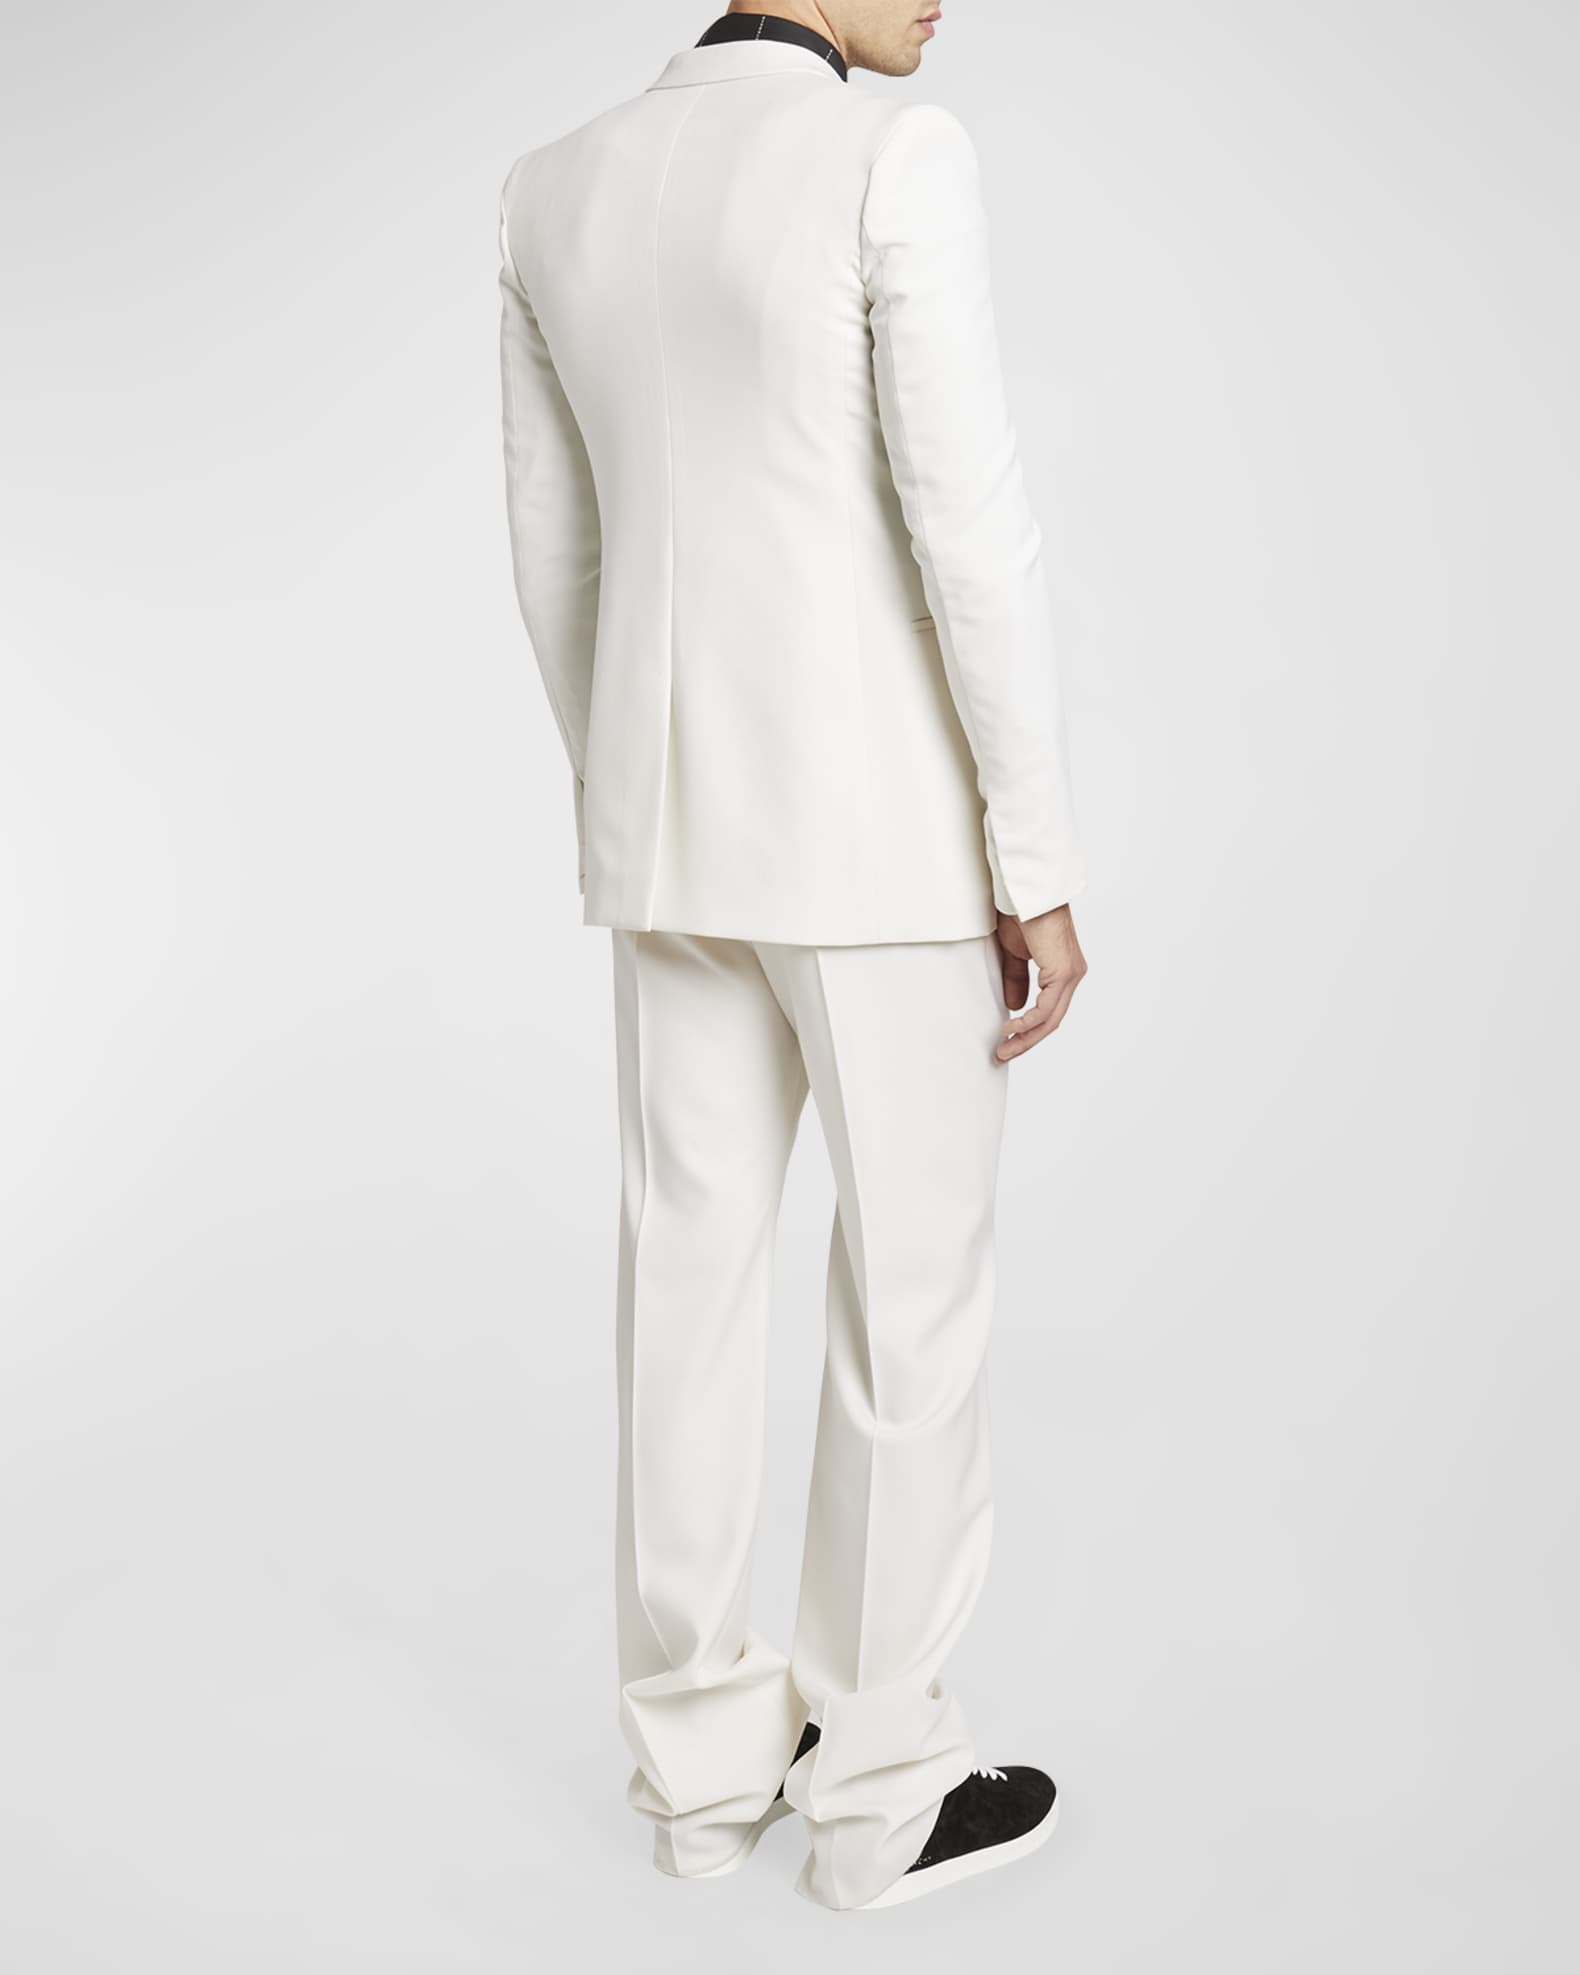 Givenchy Men's Extra-Fitted Dinner Jacket | Neiman Marcus